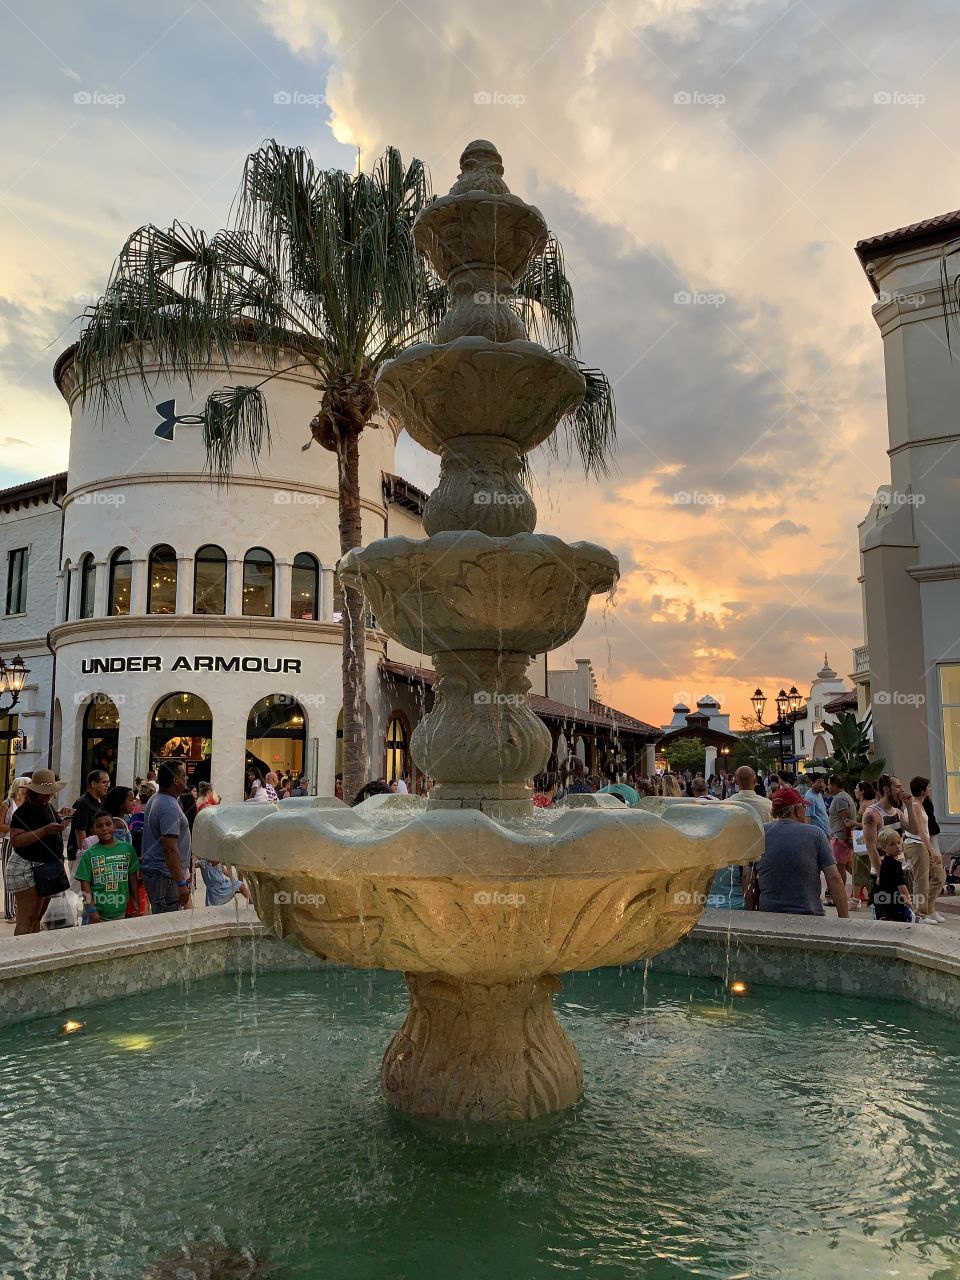 European style plaza with shops, fountain, palm tree, people and sunset